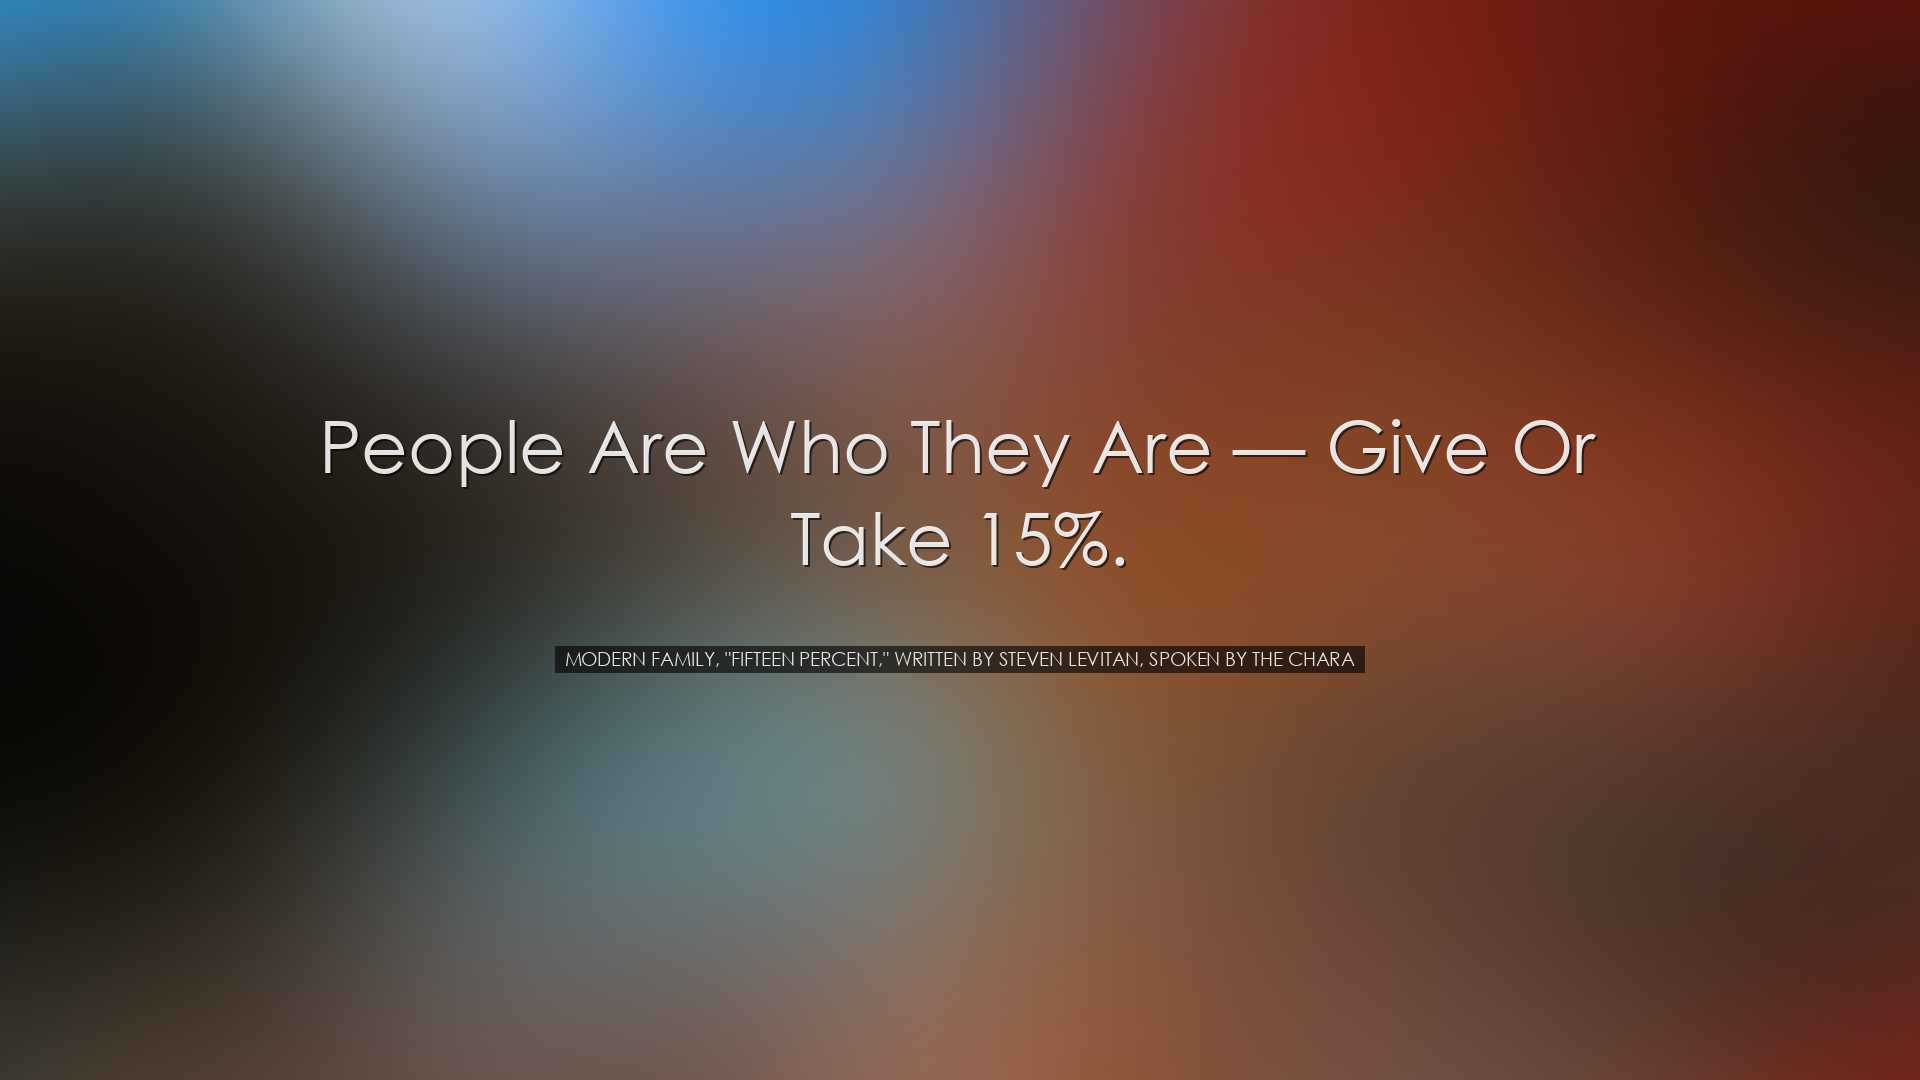 People are who they are â€” give or take 15%. - Modern Family